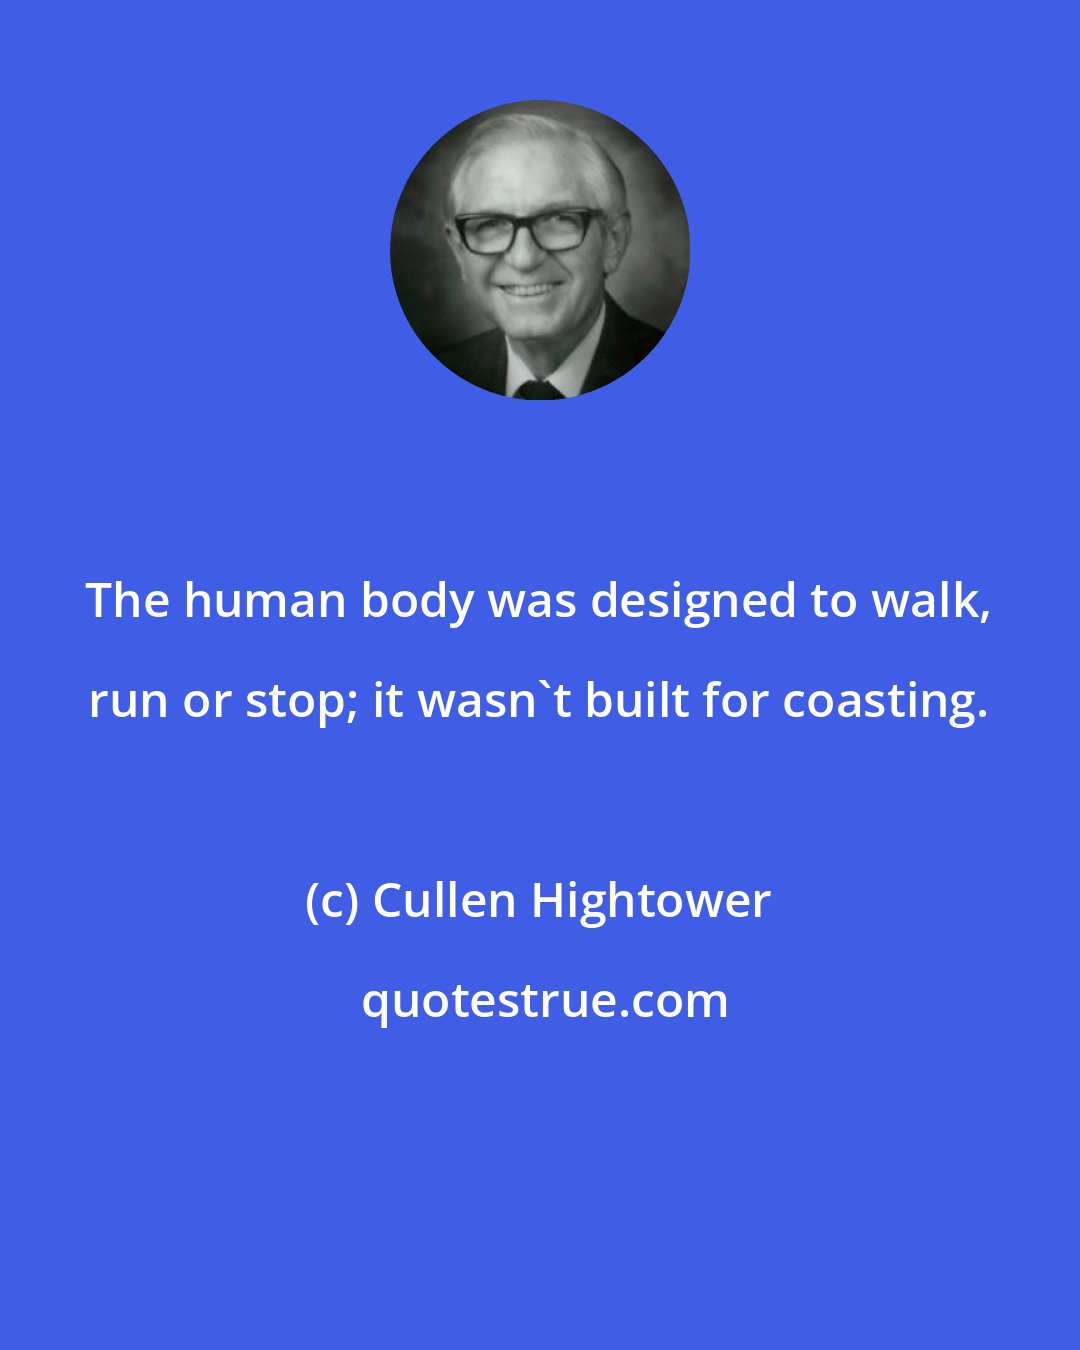 Cullen Hightower: The human body was designed to walk, run or stop; it wasn't built for coasting.